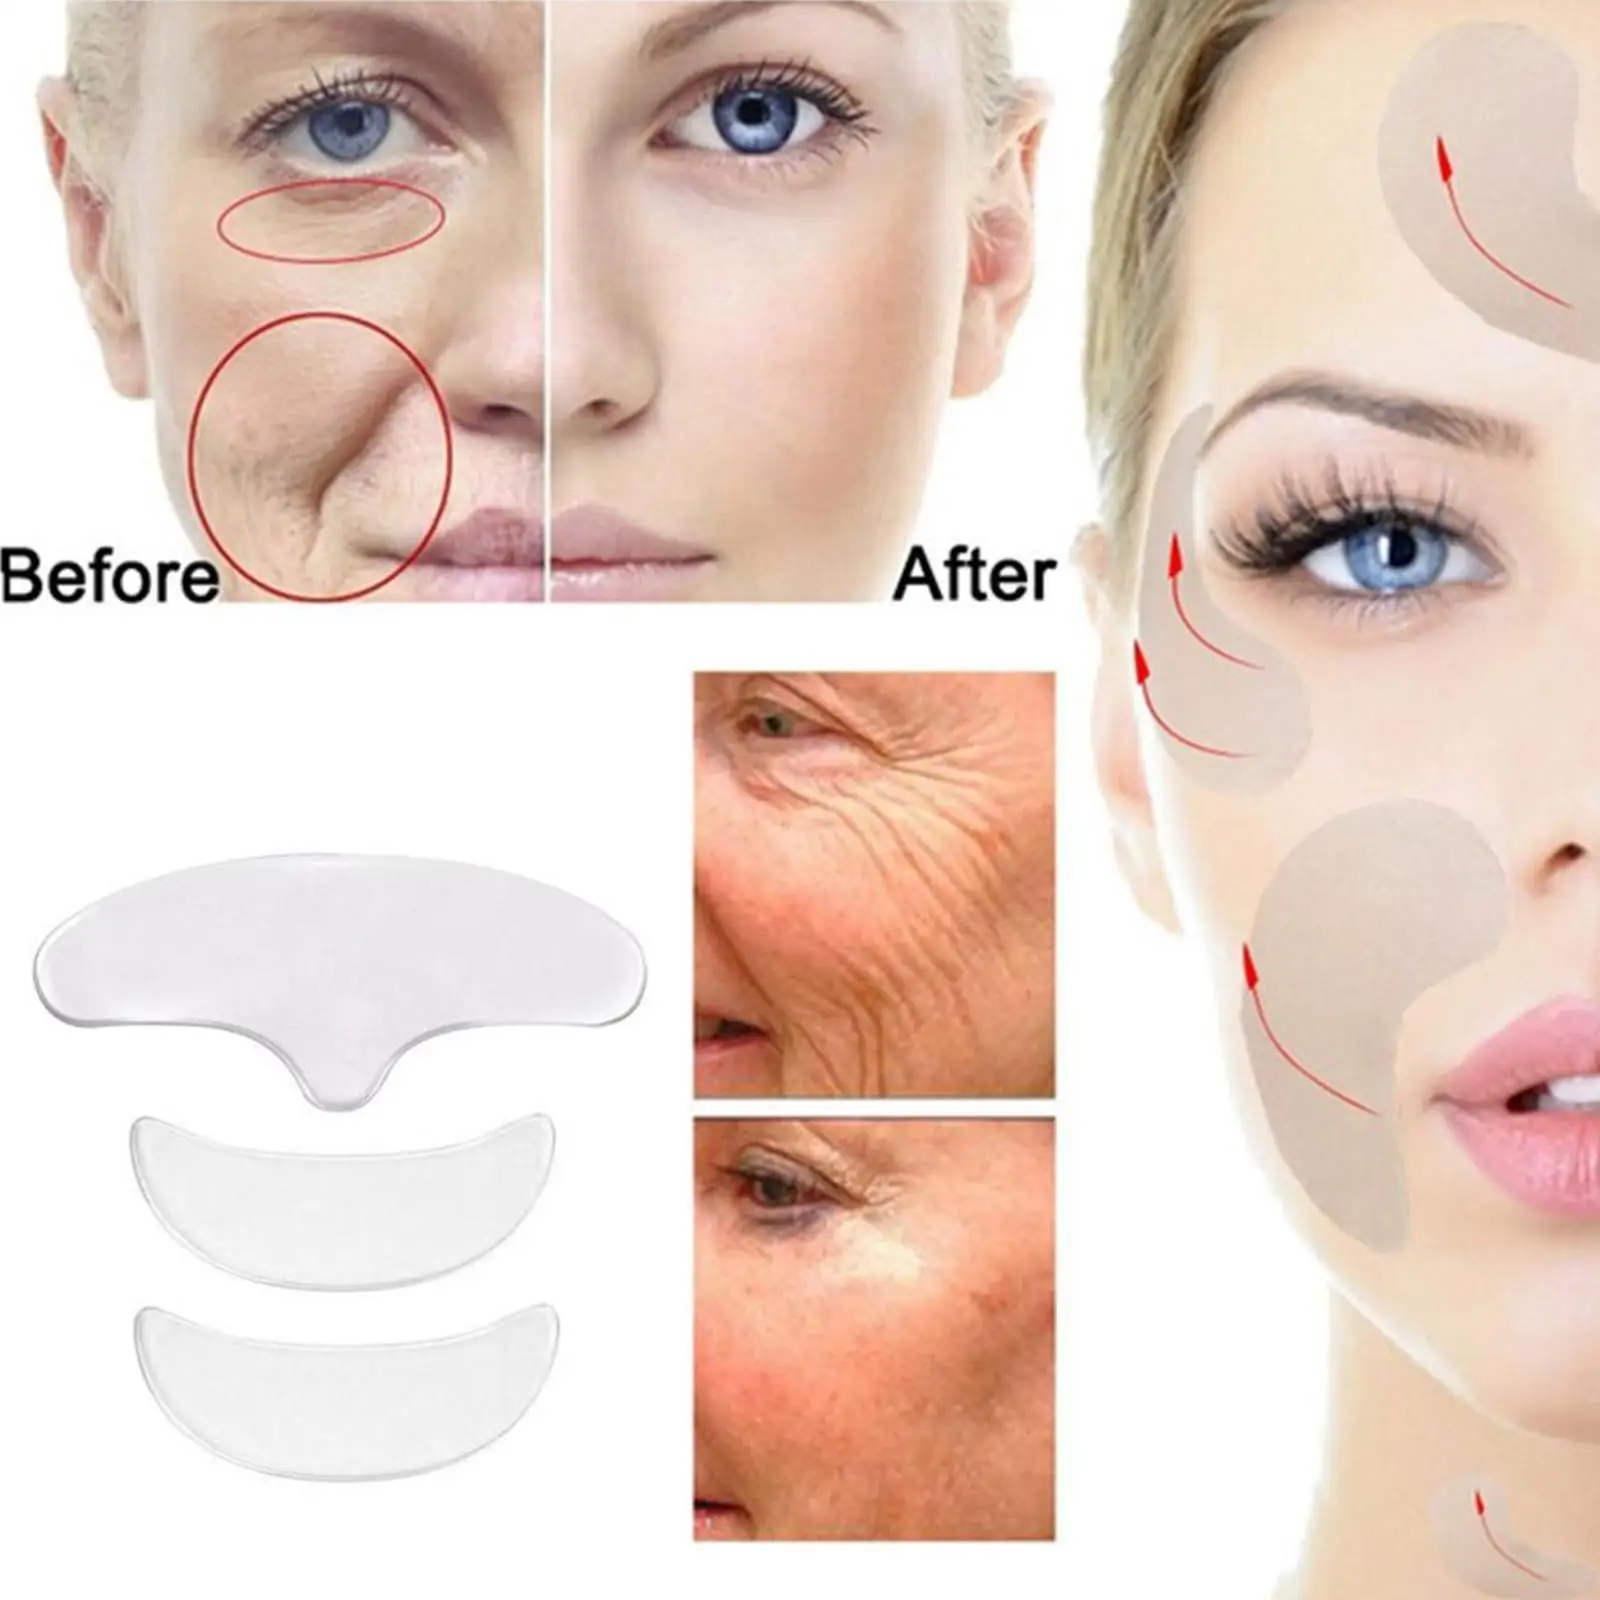 Anti Wrinkle Forehead Patch Silicone Reusable Silicone Patch Soft Comfortable Easy Facial Eye Anti-aging Face Skin Care Tool 3d reusable breathable beauty women anti wrinkle slimming bandage v shaper facial slimming bandage full face lift sleeping mask